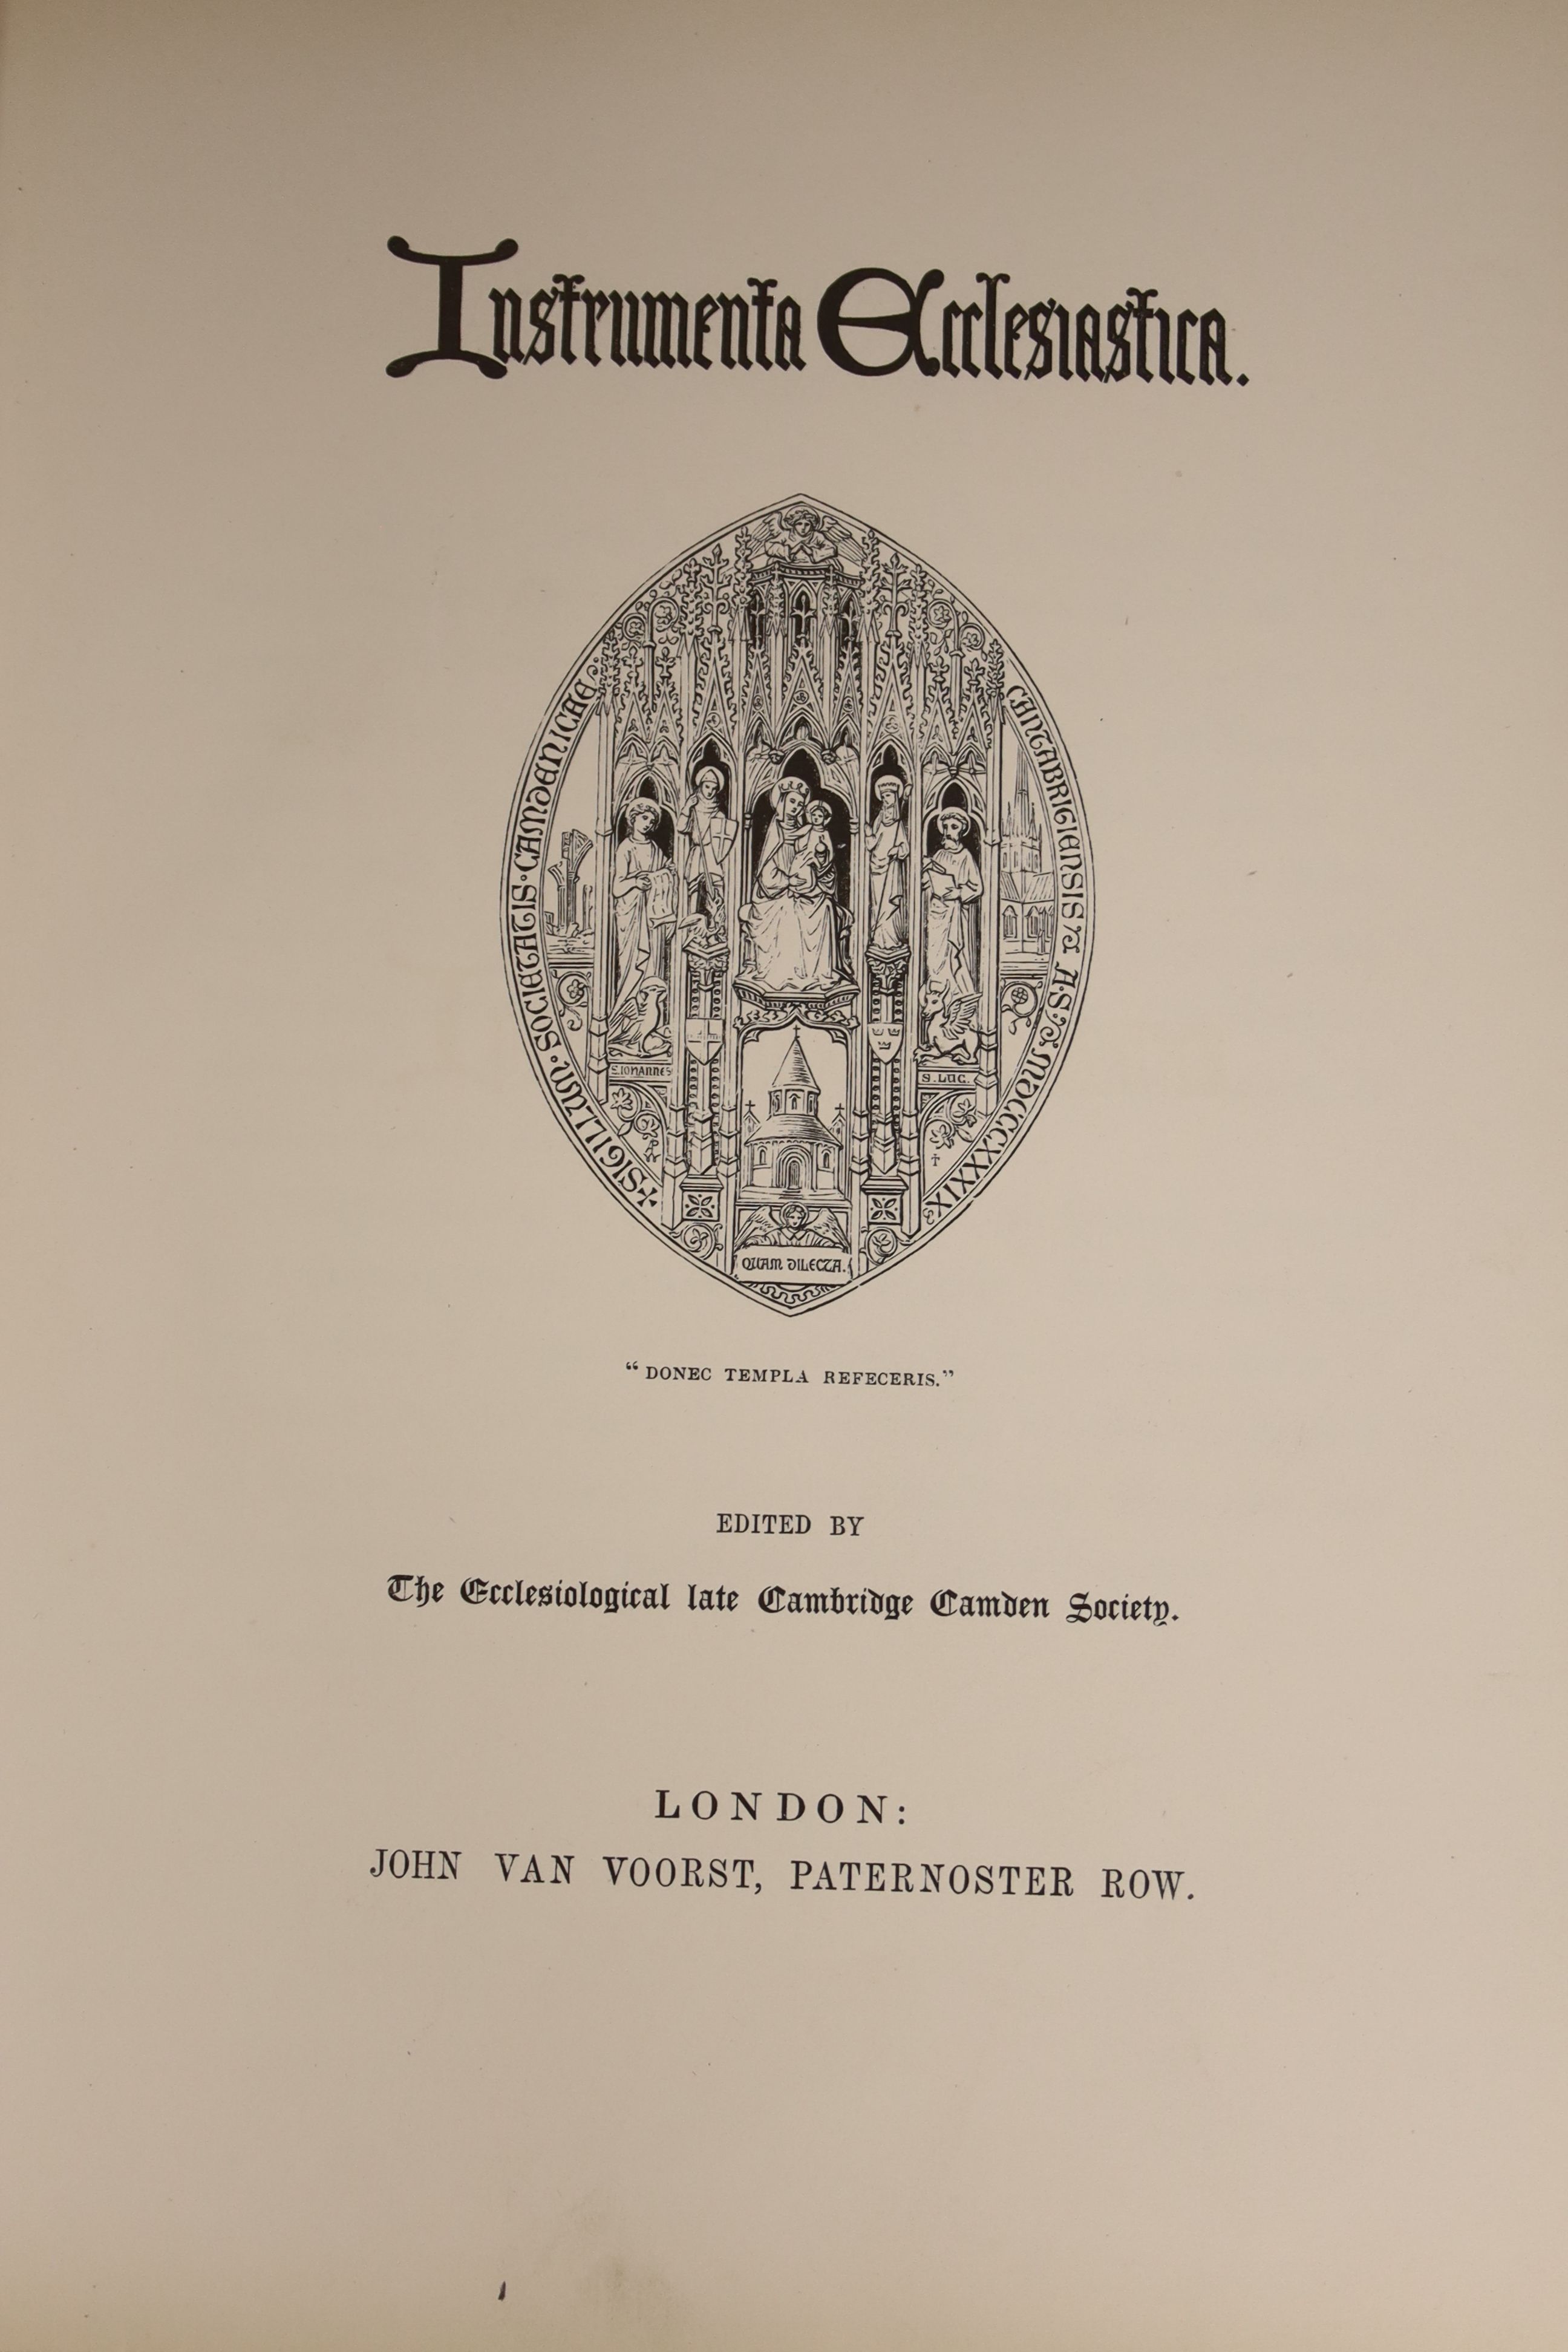 Instumenta Ecclesiastica, edited by the Ecclesiological late Cambridge Camden society, John van Voorst, London together with Gilbert White, Natural History and Antiquities of Selbourne in the county of Southampton, Macmi